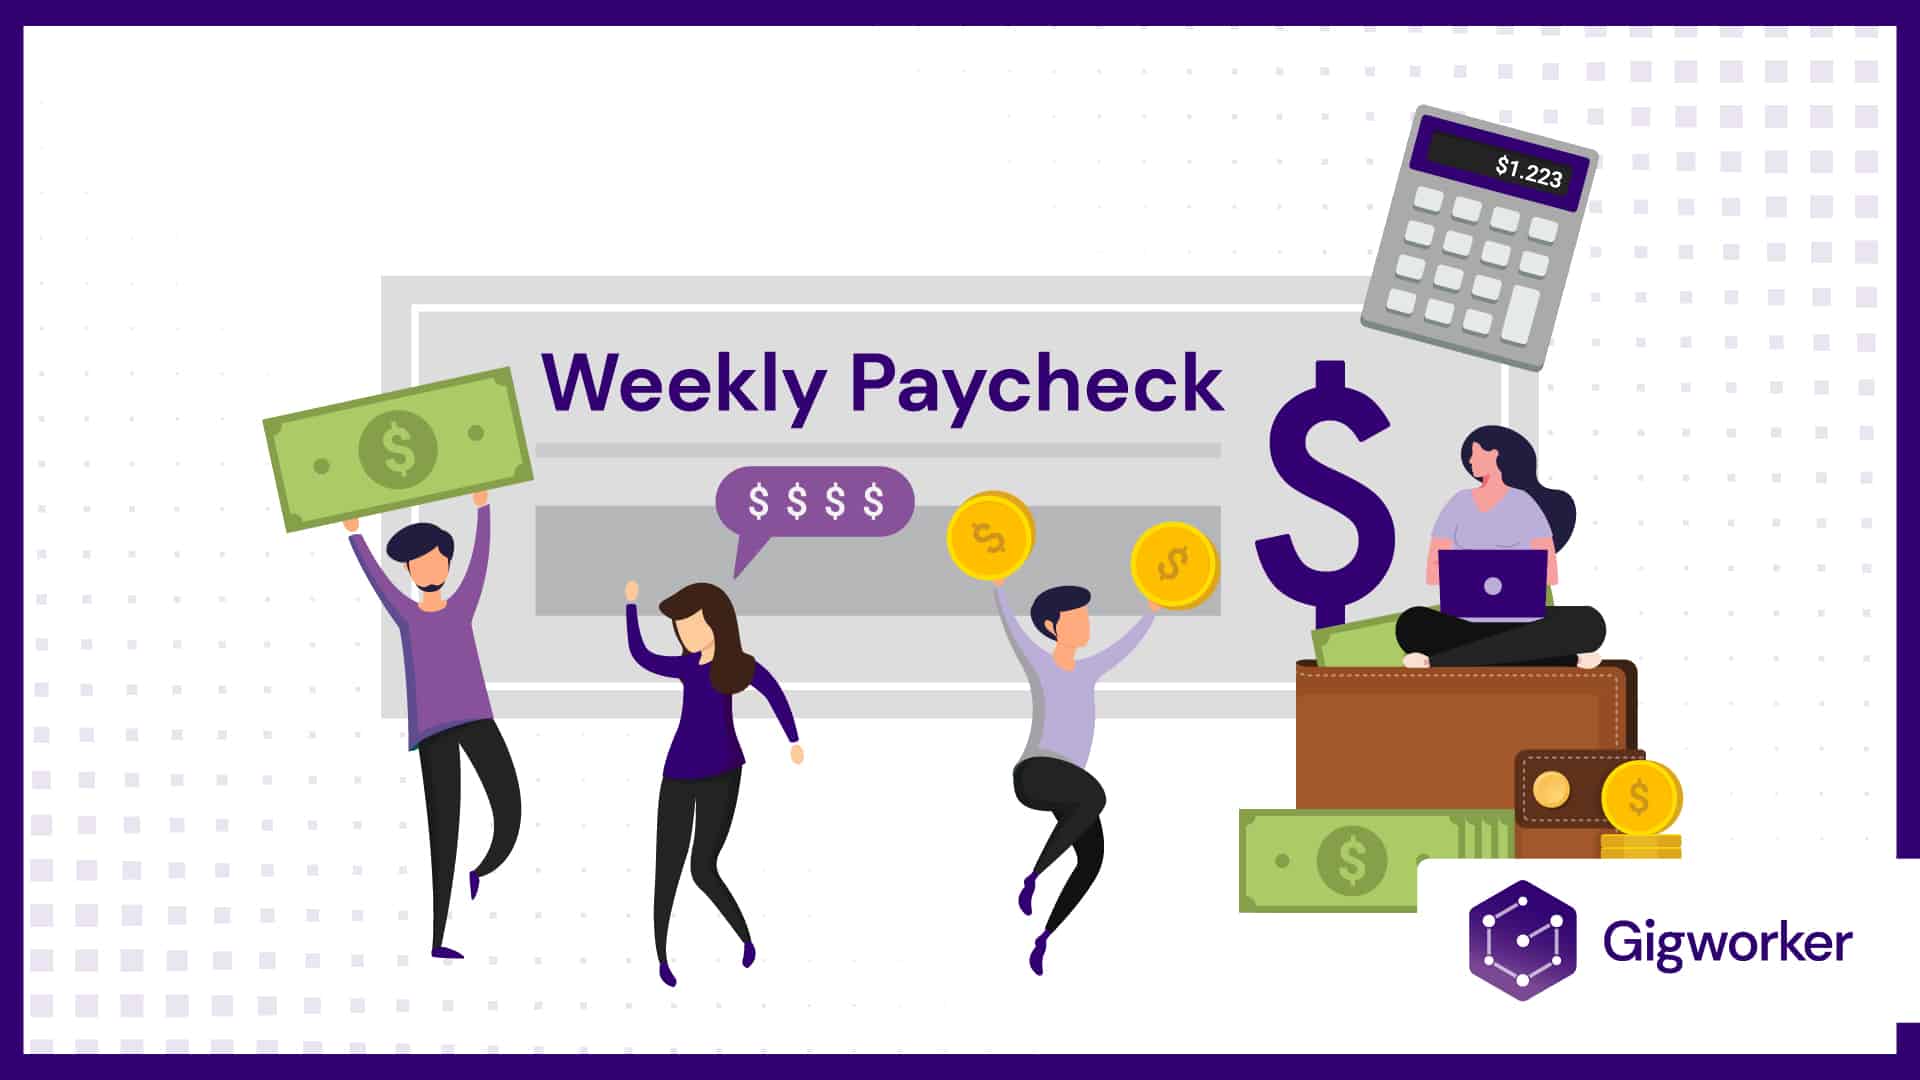 vector graphic showing an illustration of people working and receiving weekly pay check graphics related to jobs that pay weekly